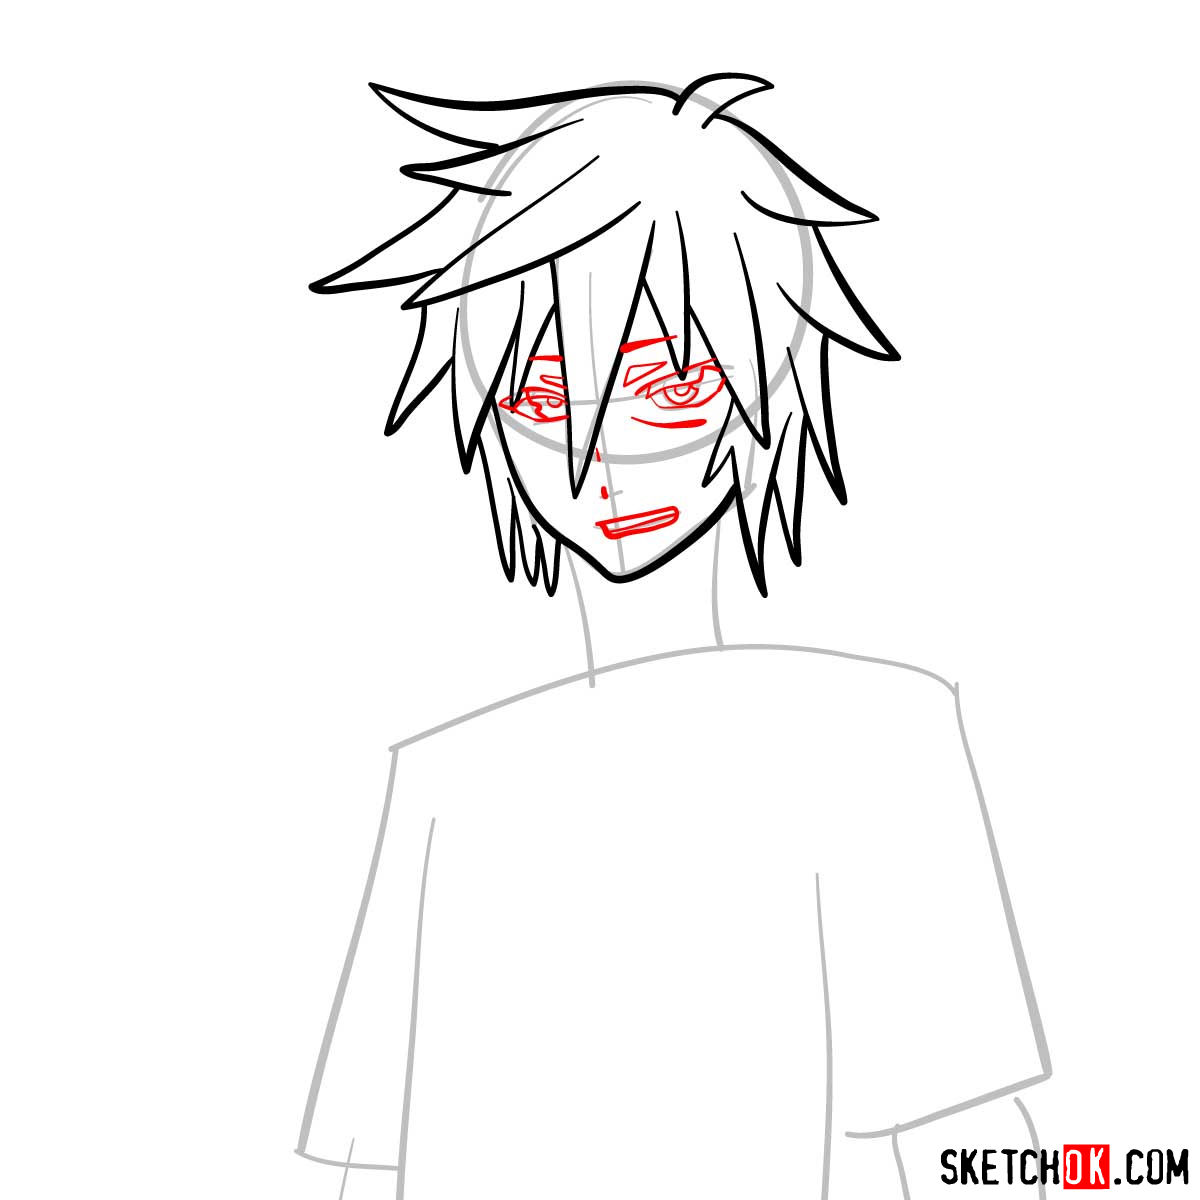 How to draw Sora from No Game No Life anime - step 05